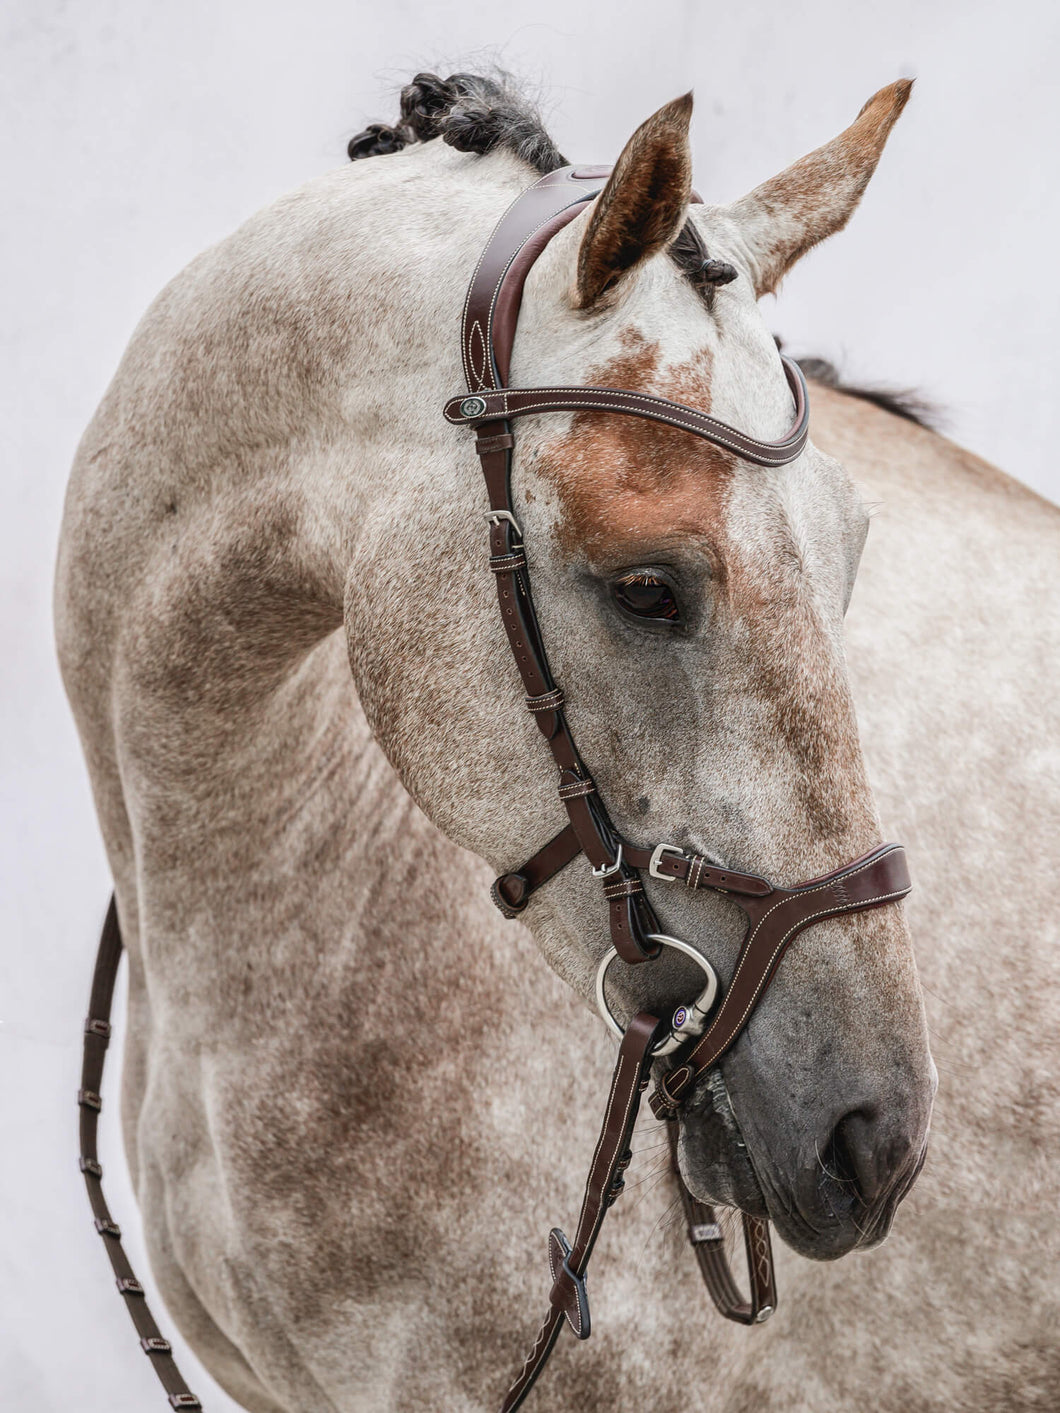 The adjustable noseband gives the rider an opportunity to choose how much pressure to apply on the nose. It helps the horse to accept the bit and is a perfect bridle for both the young horse who's still learning to communicate with the rider as well as for the type of horse who tries to avoid contact with the rider's hand and rather folds in the neck too much.